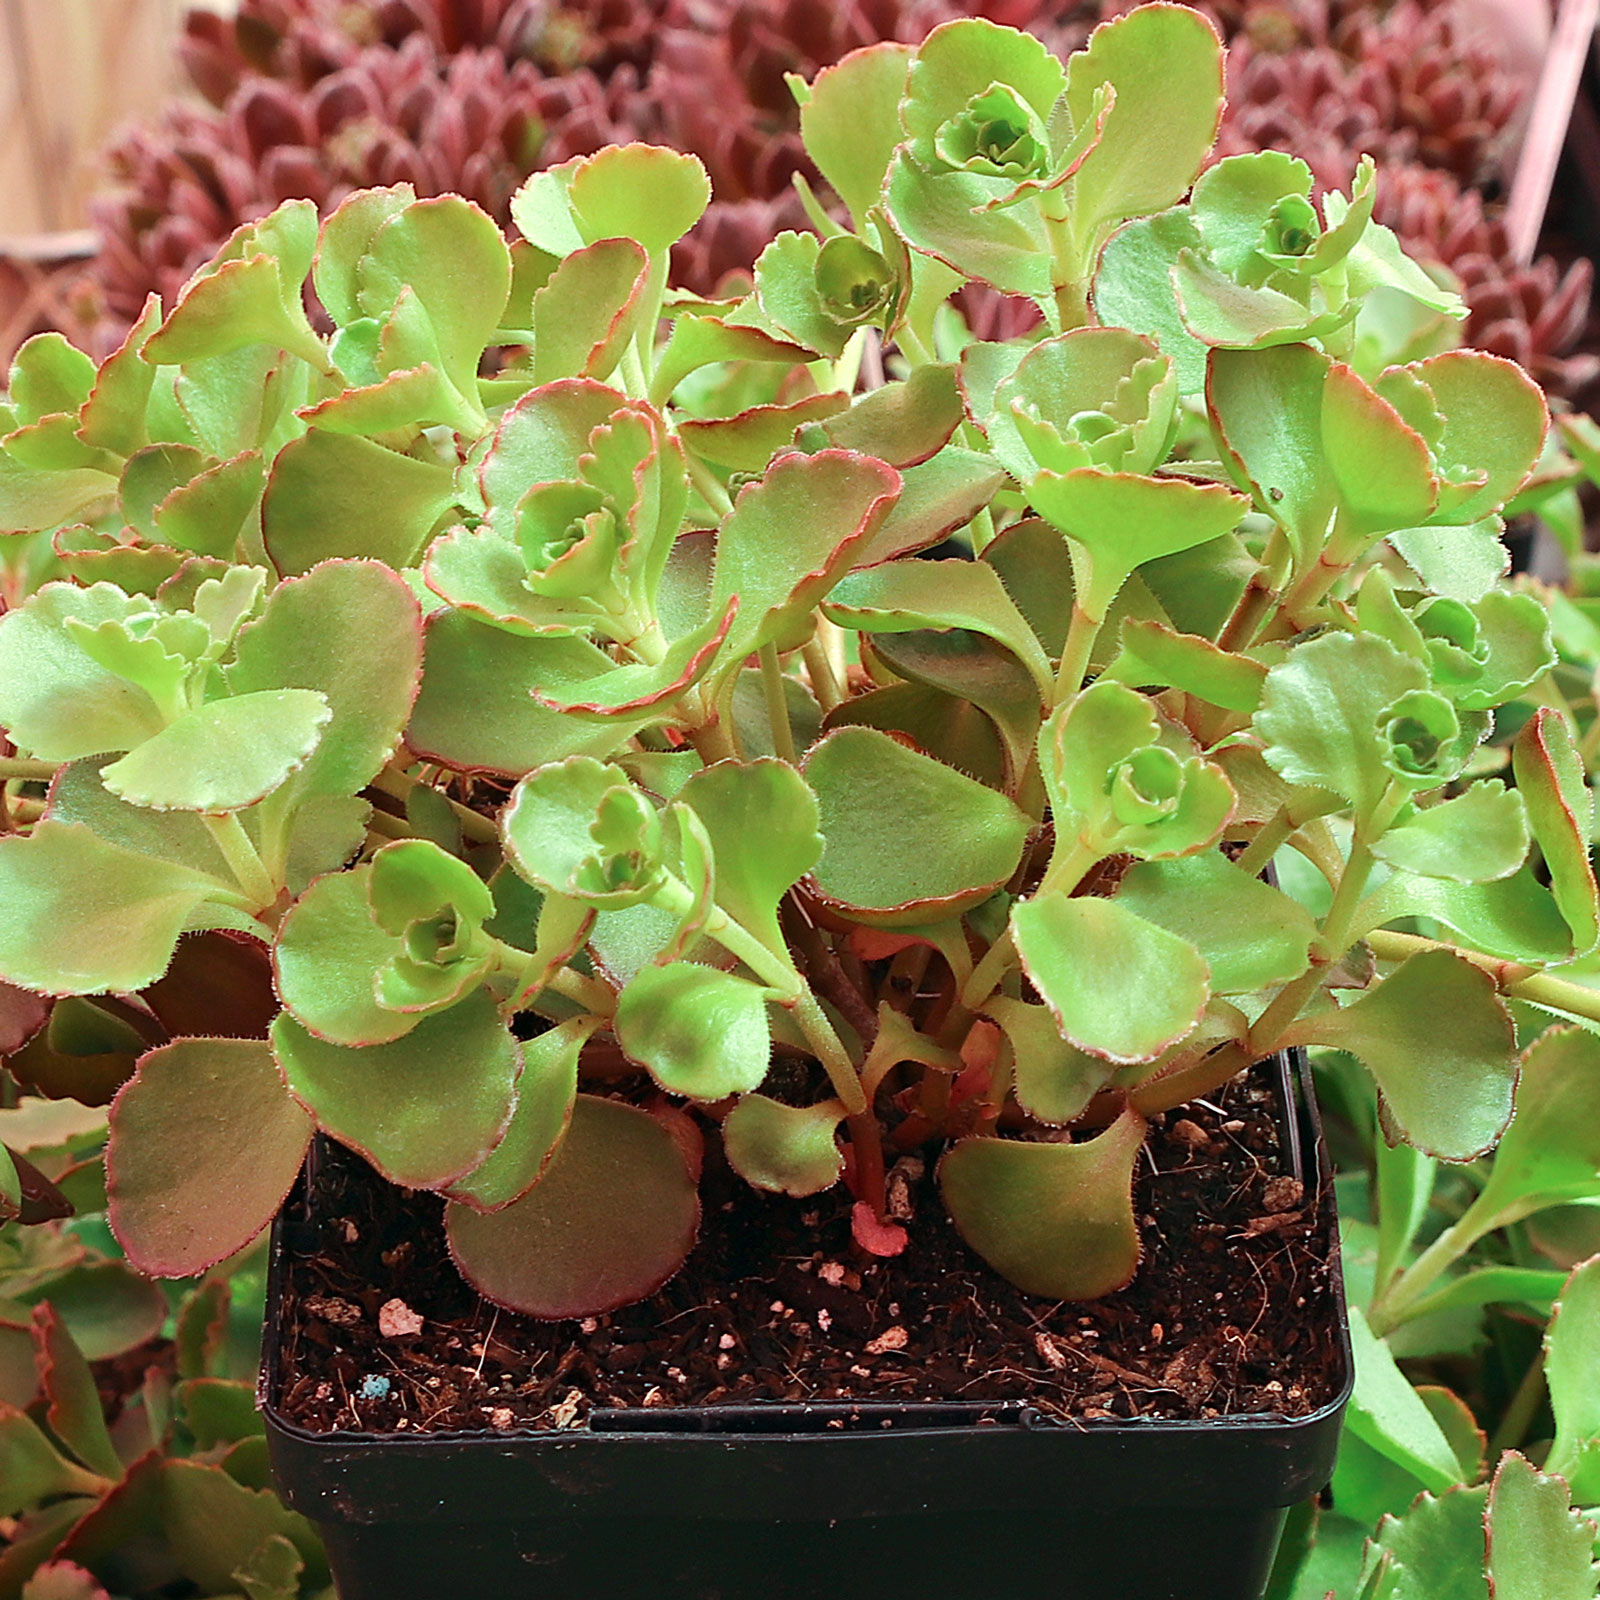 The Sedum Spurium- Dragon’s Blood has drop some of it’s lower leaves. What does it need?